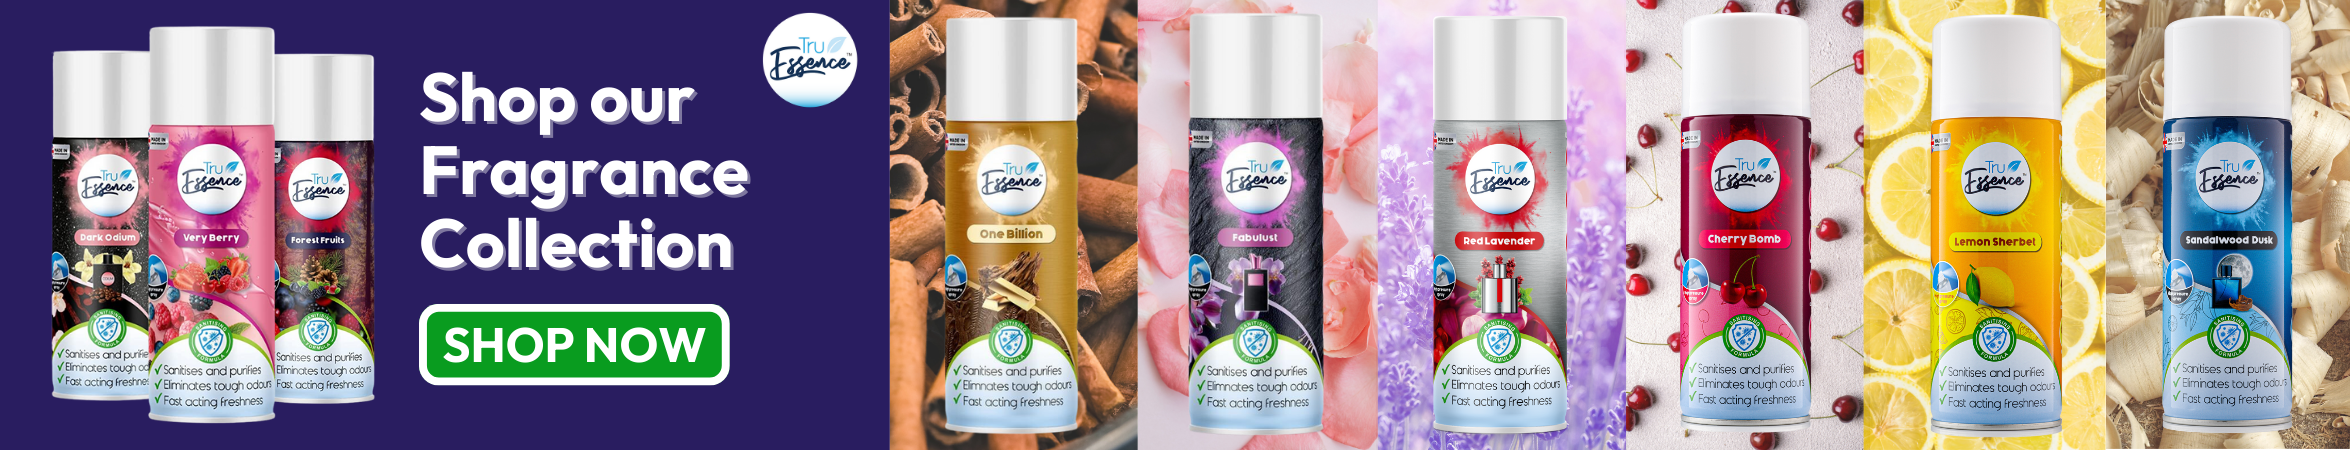 Browse Air Fresheners and fragrances for your home and car. Choose from a range of scents of spray, gel or hanging air fresheners from DSL. Shop our TruEssence collection or explore the designer fragrance inspired air fresheners. Make your home smell fresher for longer.